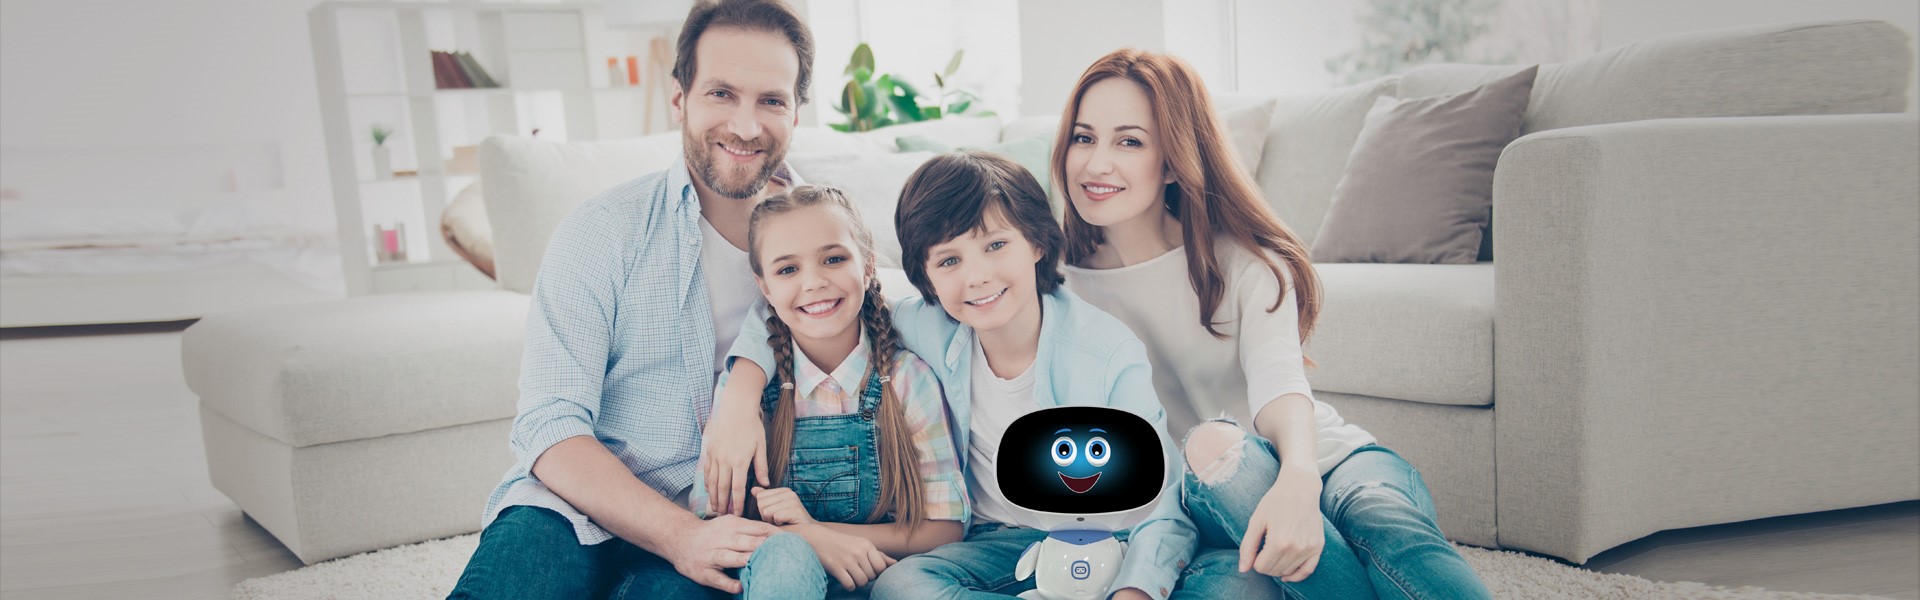 Empowering Education: How Misa Robot Helps Kids Learn